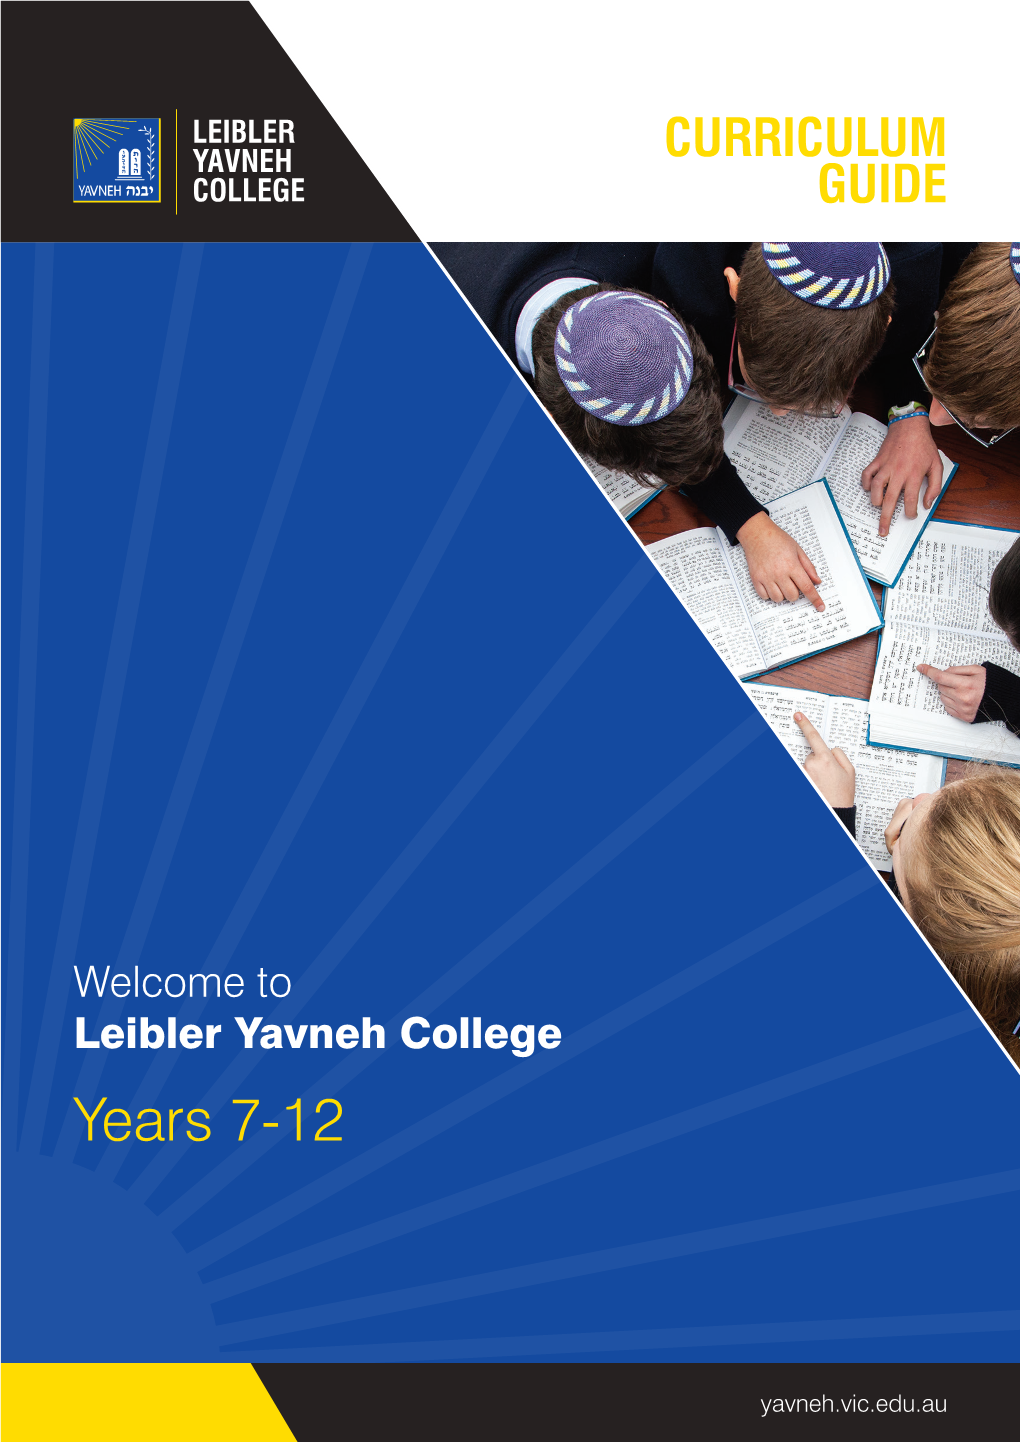 Curriculum Guide Leibler Yavneh College 2 OUR VISION and VALUES